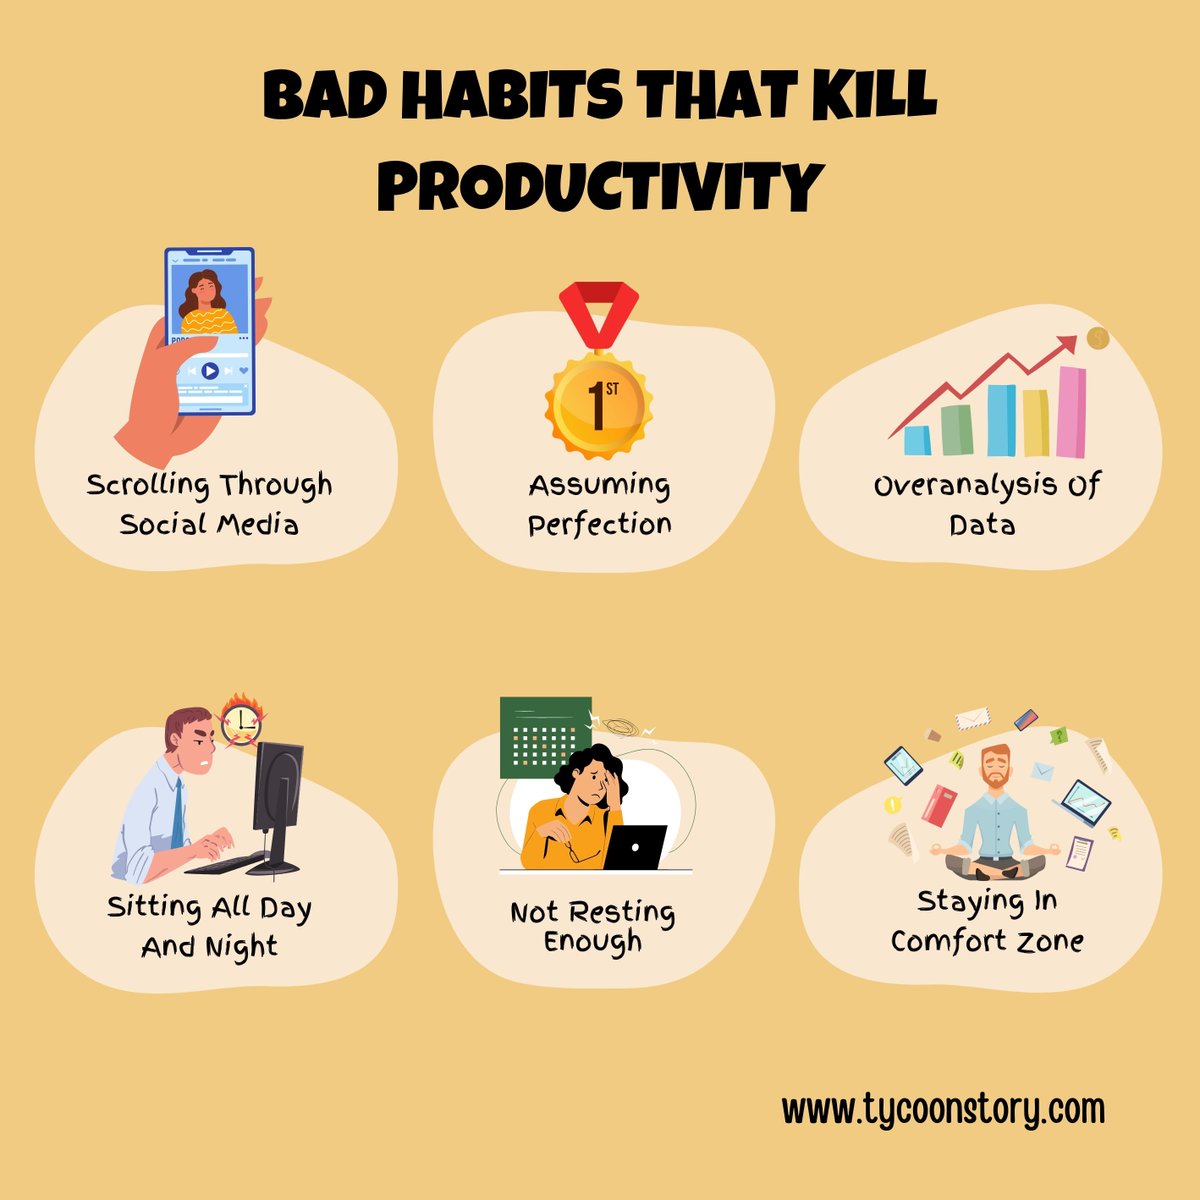 Bad Habits That Kill Productivity #productivitykillers #BadHabits #workplacewellness #timewasters #breakthecycle #MaximizePotential #WorkSmarter #healthyhabits #mindfulworkout #growthmindset #ProductivityTips #breakbadhabits #BoostEfficiency #timemanagement #selfimprovement